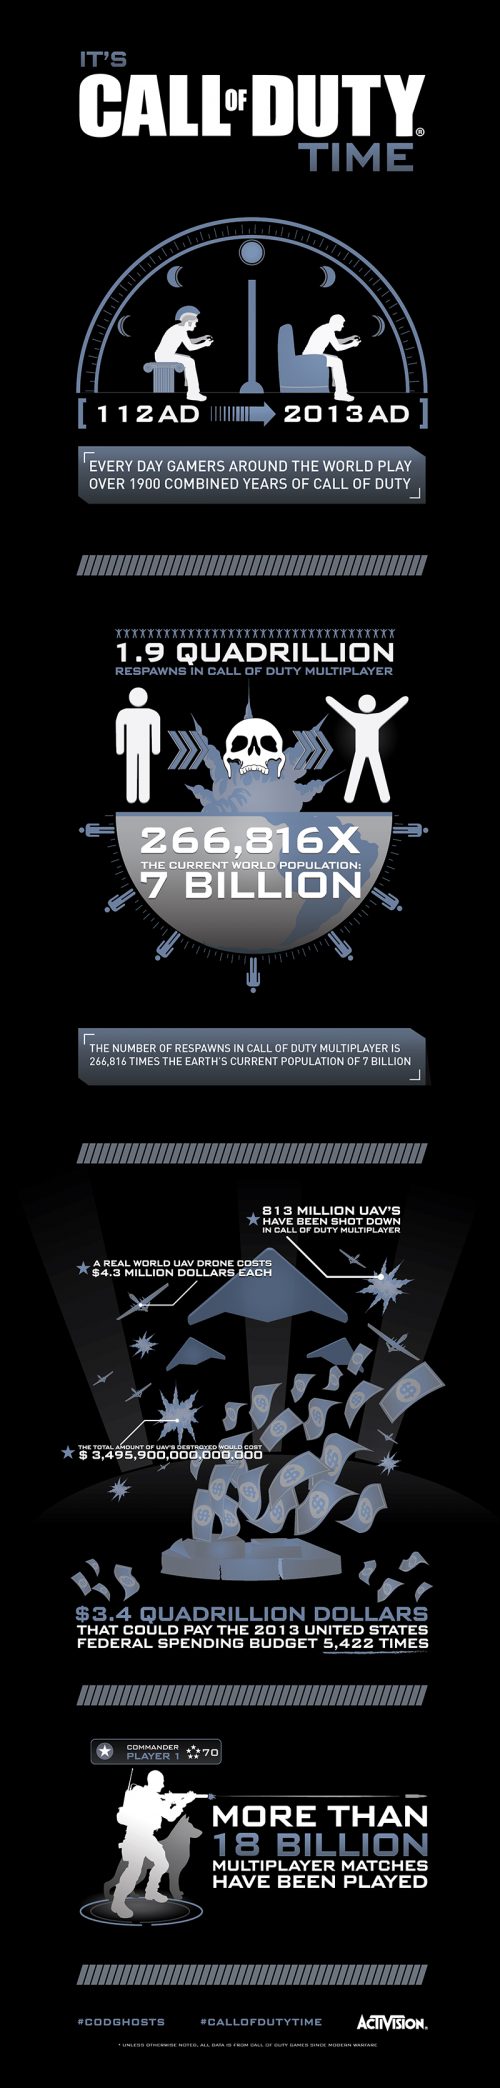 It’s Call of Duty Time! Stats Infographic Details The ‘Call of Duty Time’